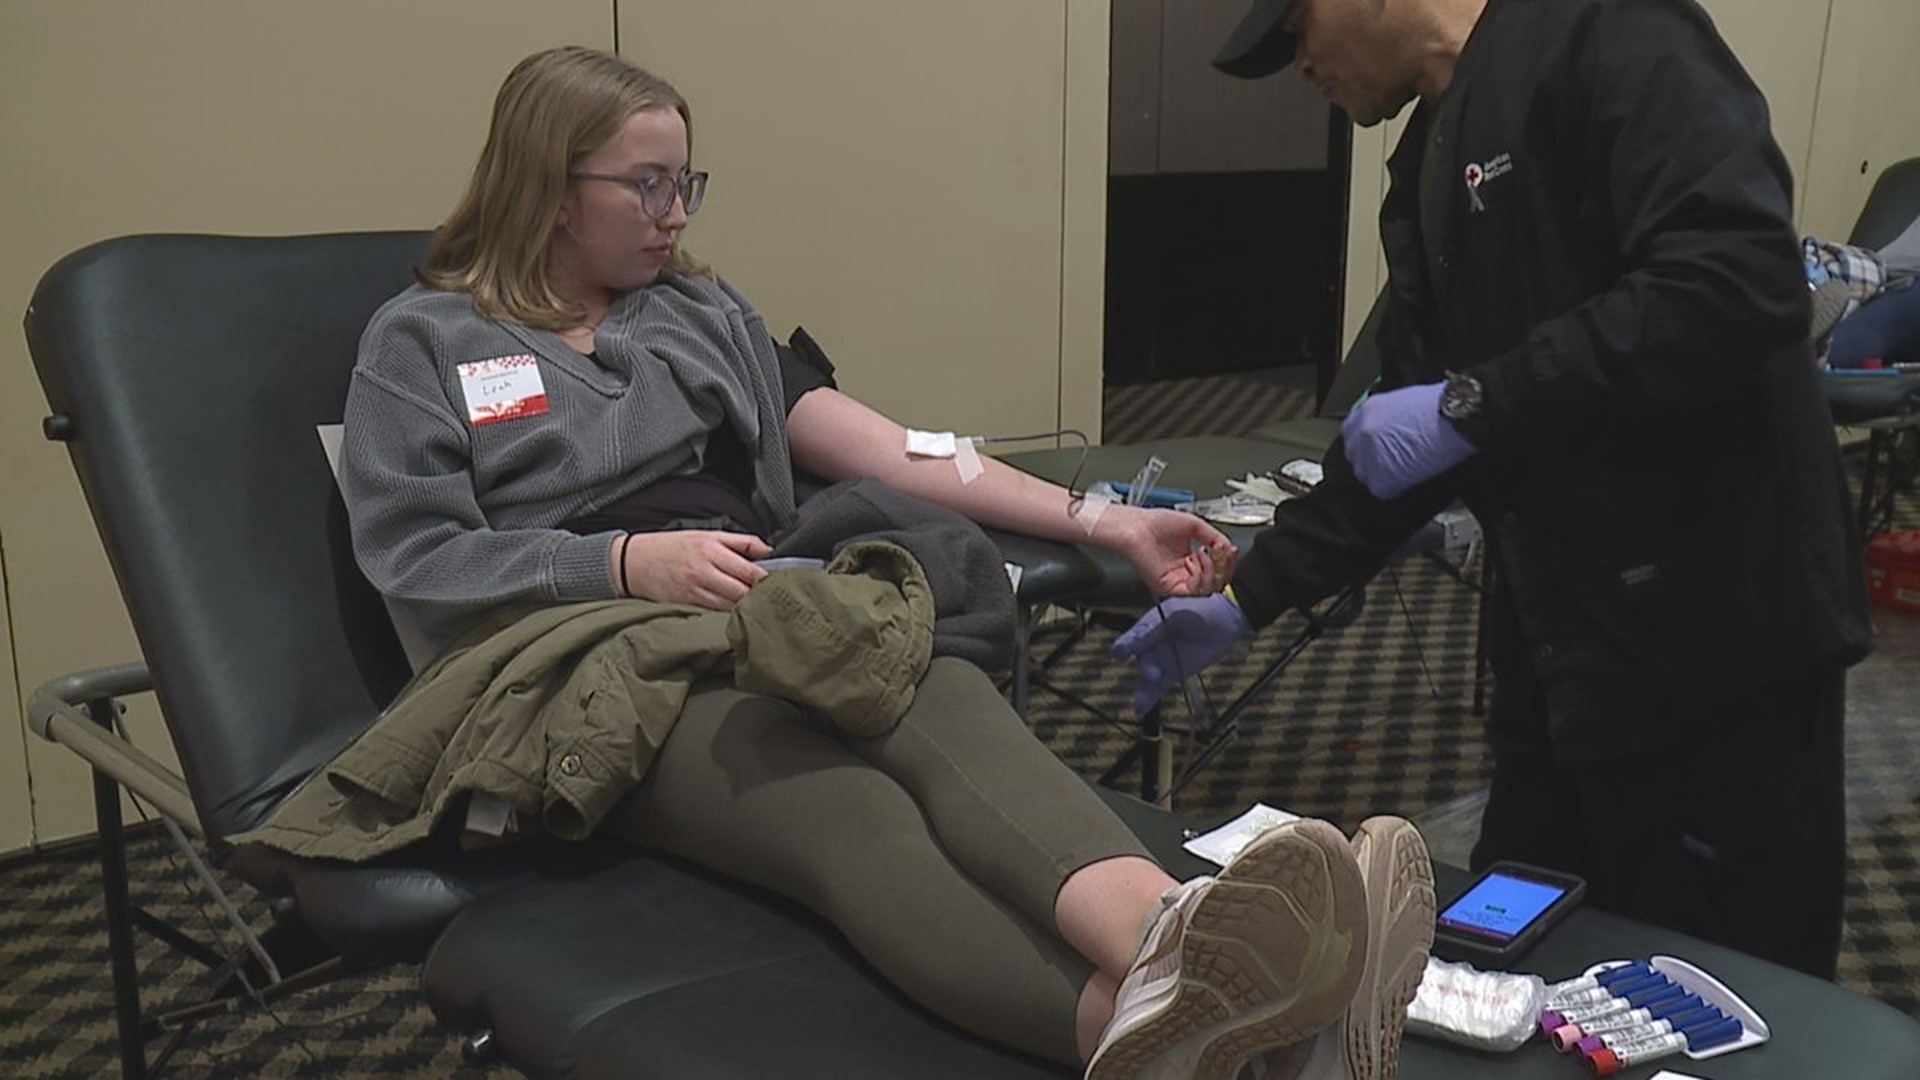 The American Red Cross collected blood donations across York County on Tuesday, emphasizing the importance of donating blood around the holidays.